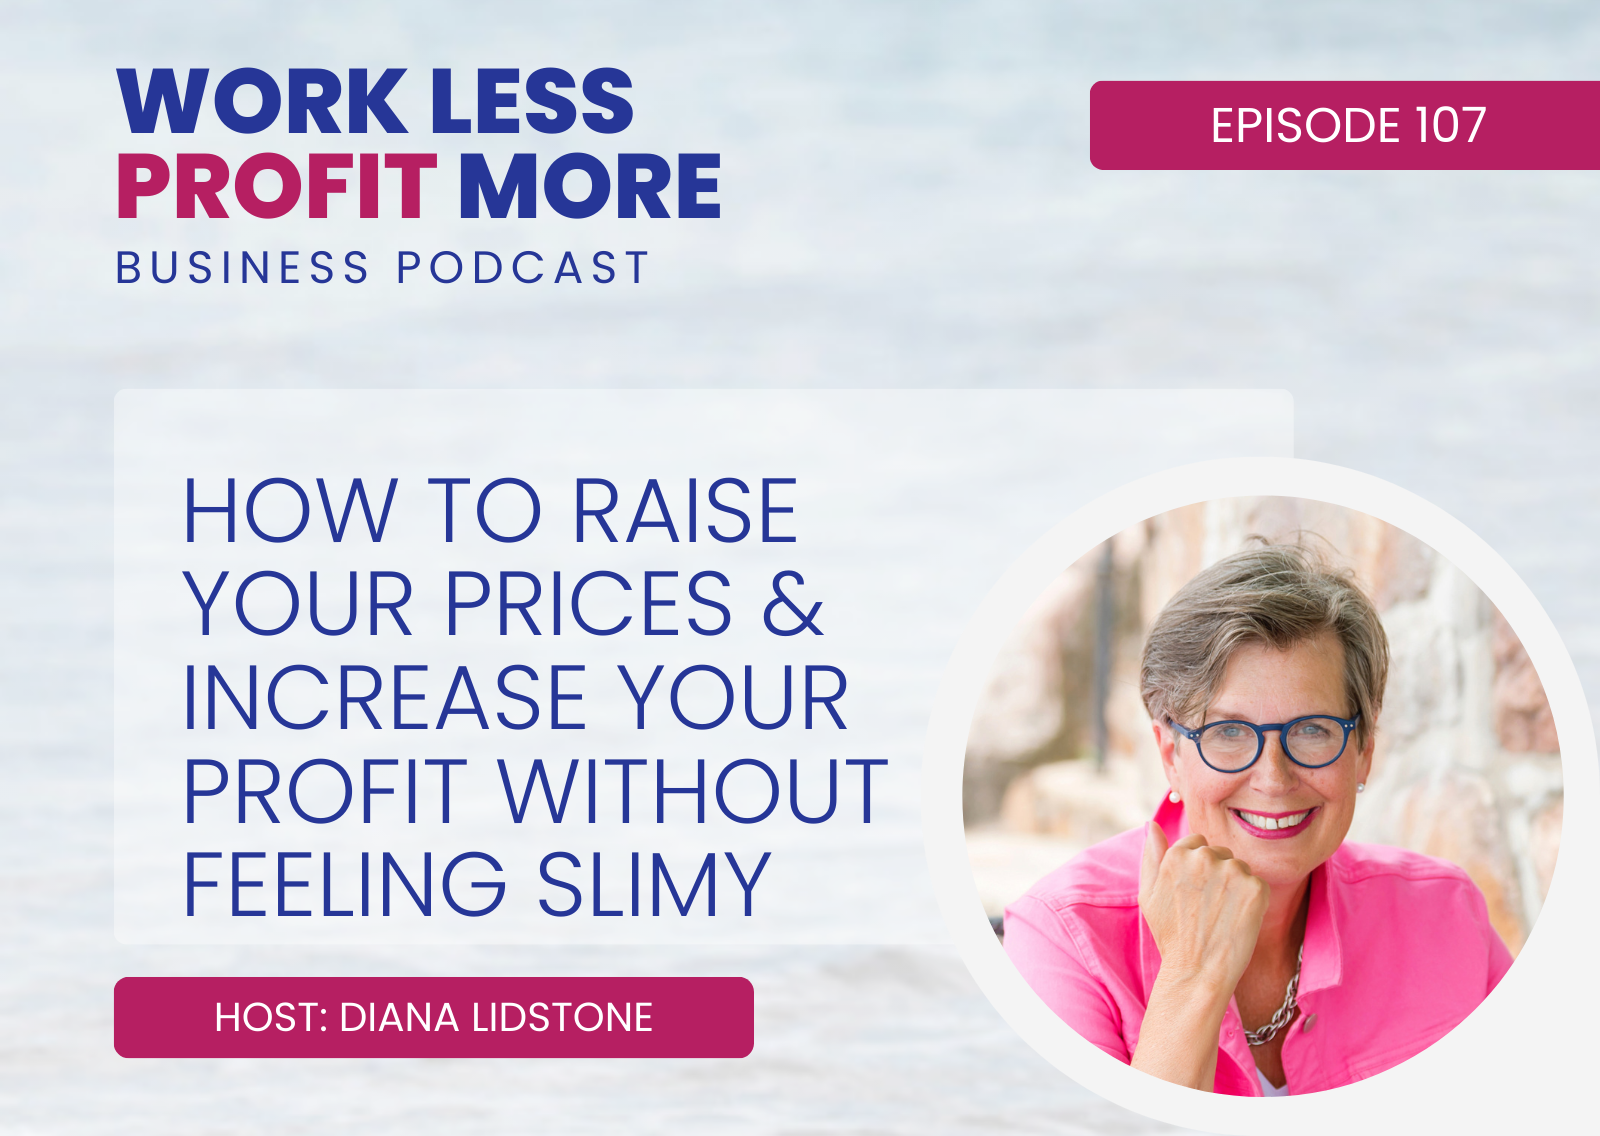 How to Raise Your Prices & Increase Your Profit Without Feeling Slimy